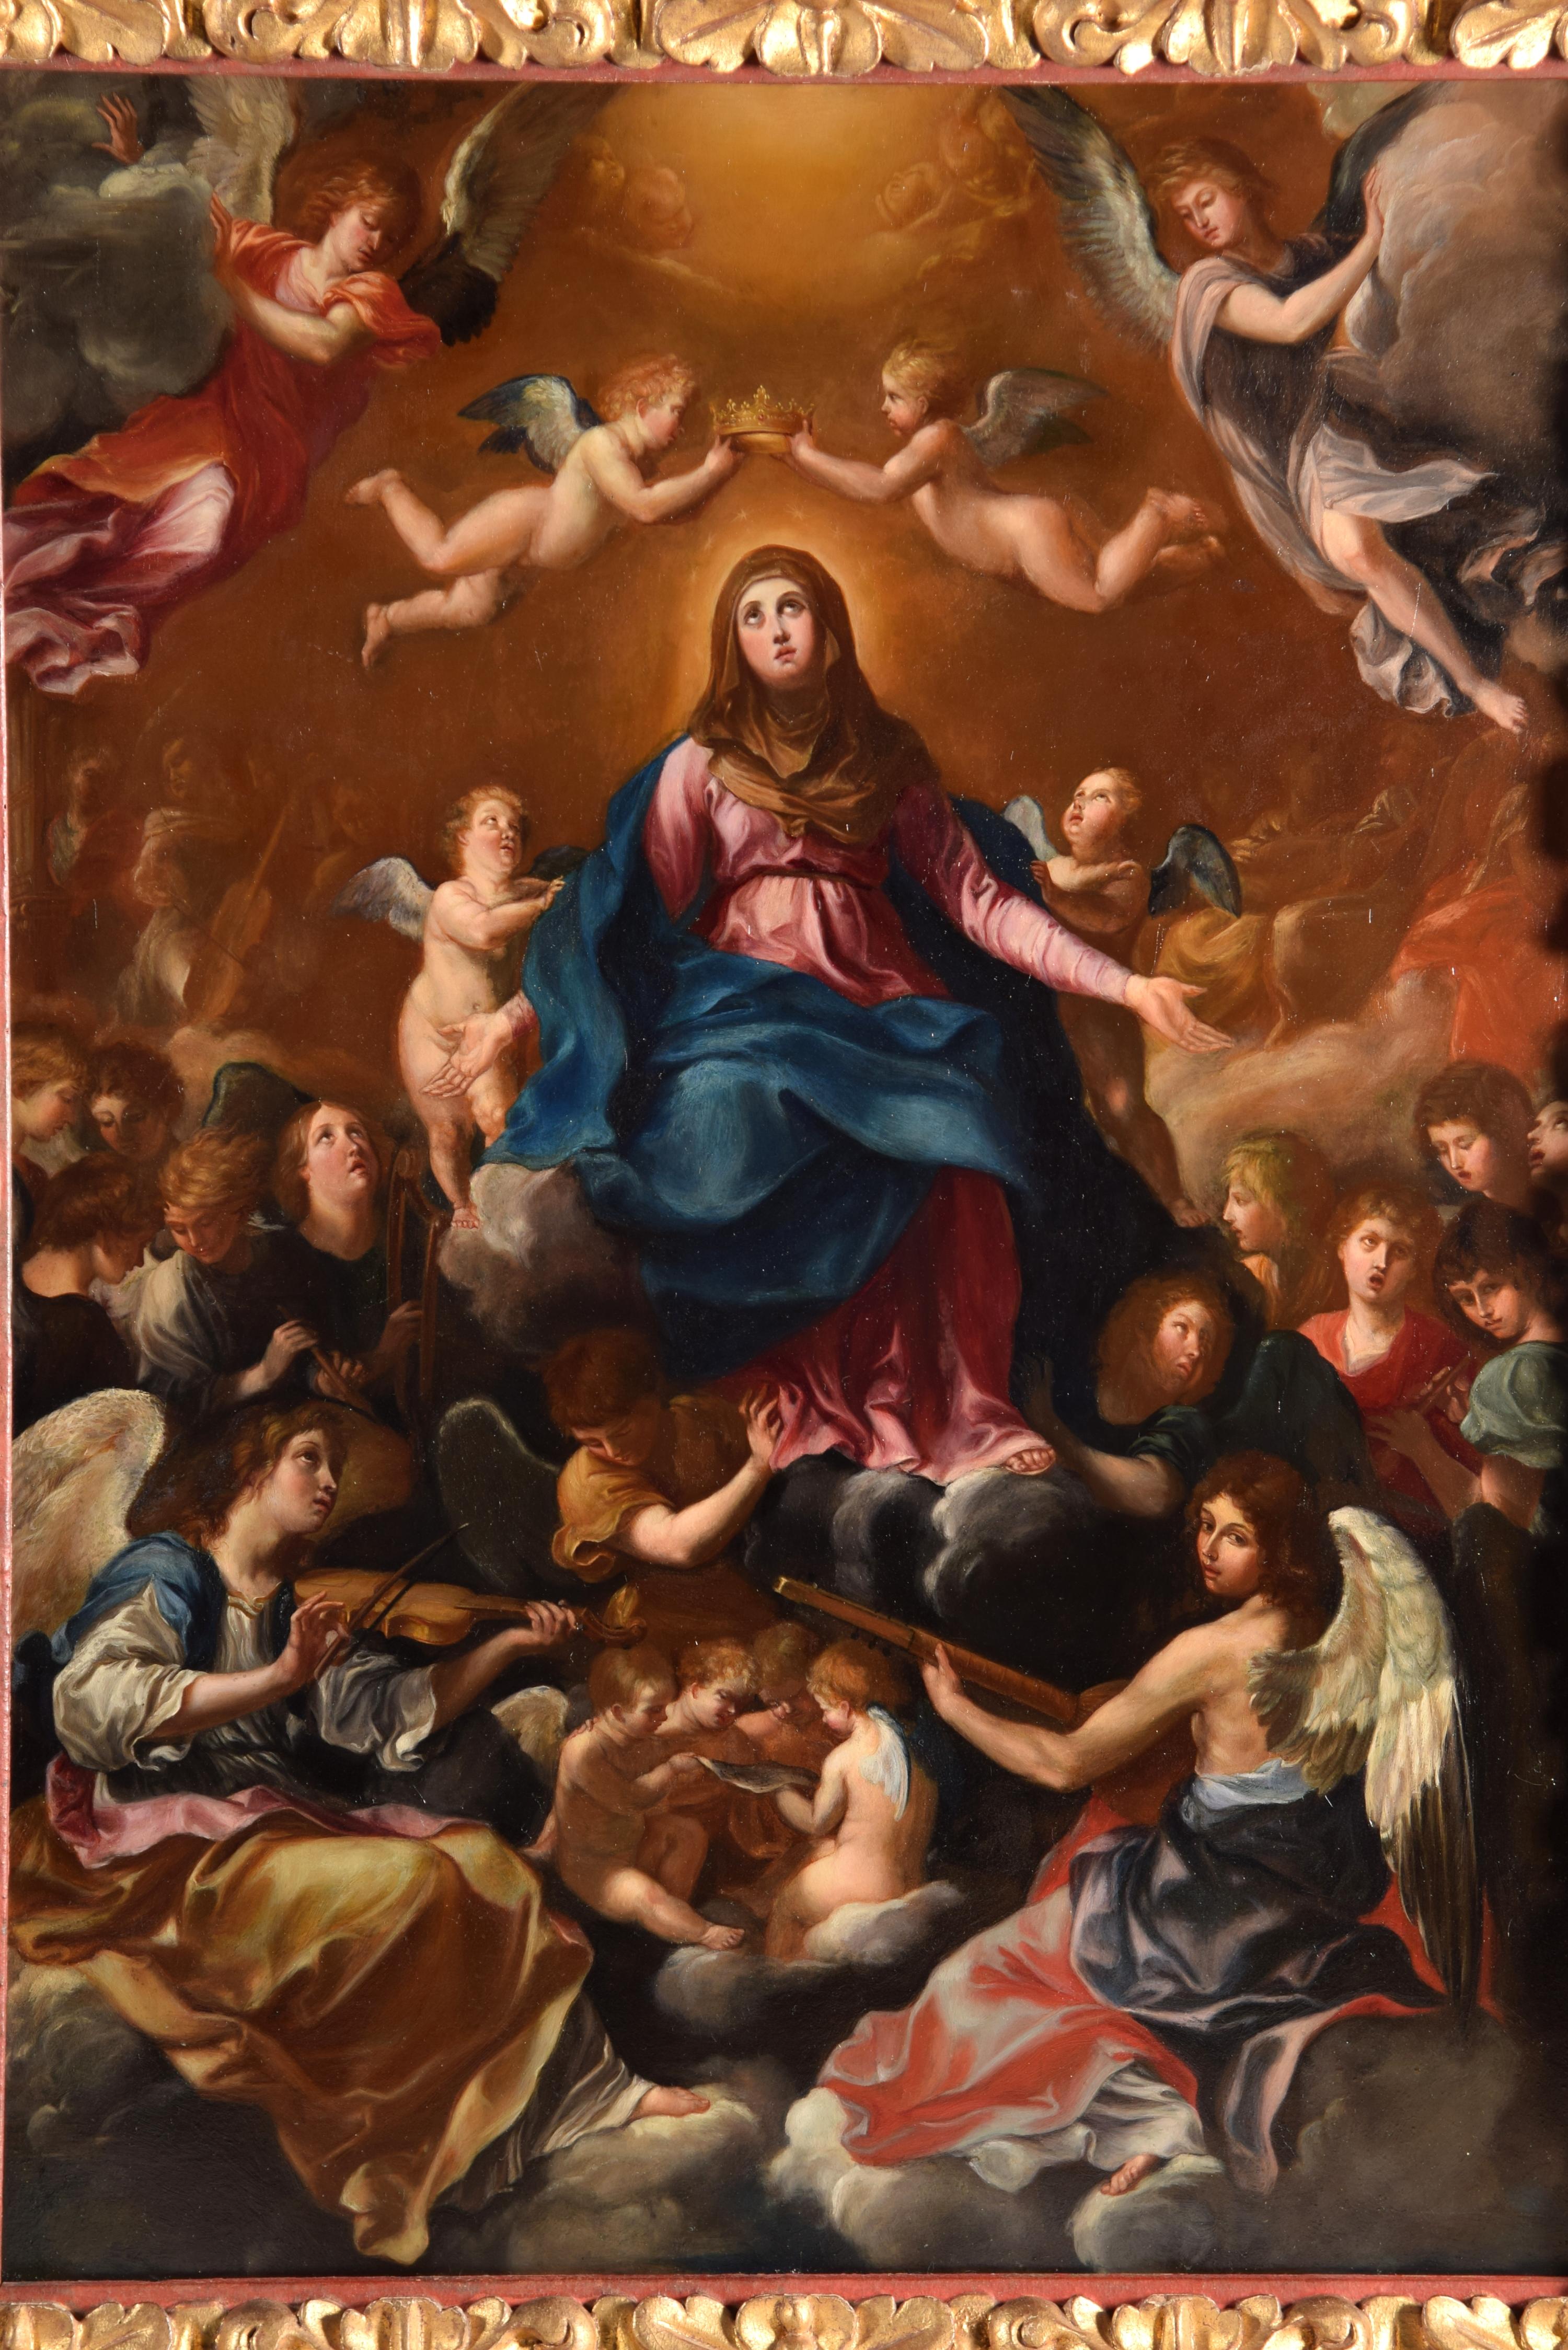 Assumption of the Virgin Mary. Oil on Copper Possibly late 17th century Following models by Guido Reni (Bologna, 1575-1642). 
Has faults. 
Oil on copper that shows the Virgin Mary seated on clouds, dressed in a red tunic and a blue mantle, in a